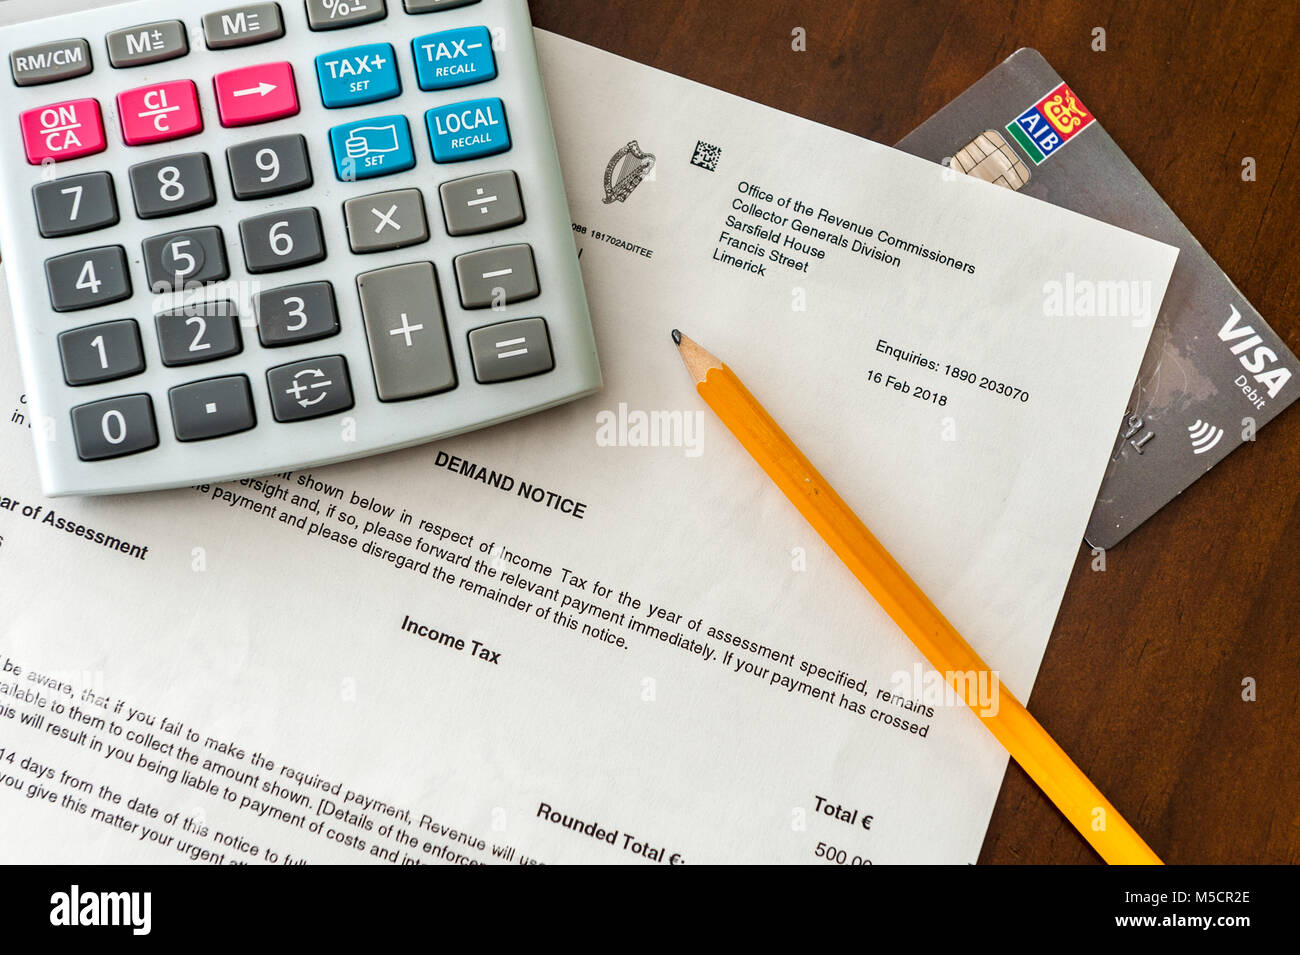 Tax demand letter for €500 from the Irish Revenue with a calculator, pencil and bank debit/visa card. Stock Photo